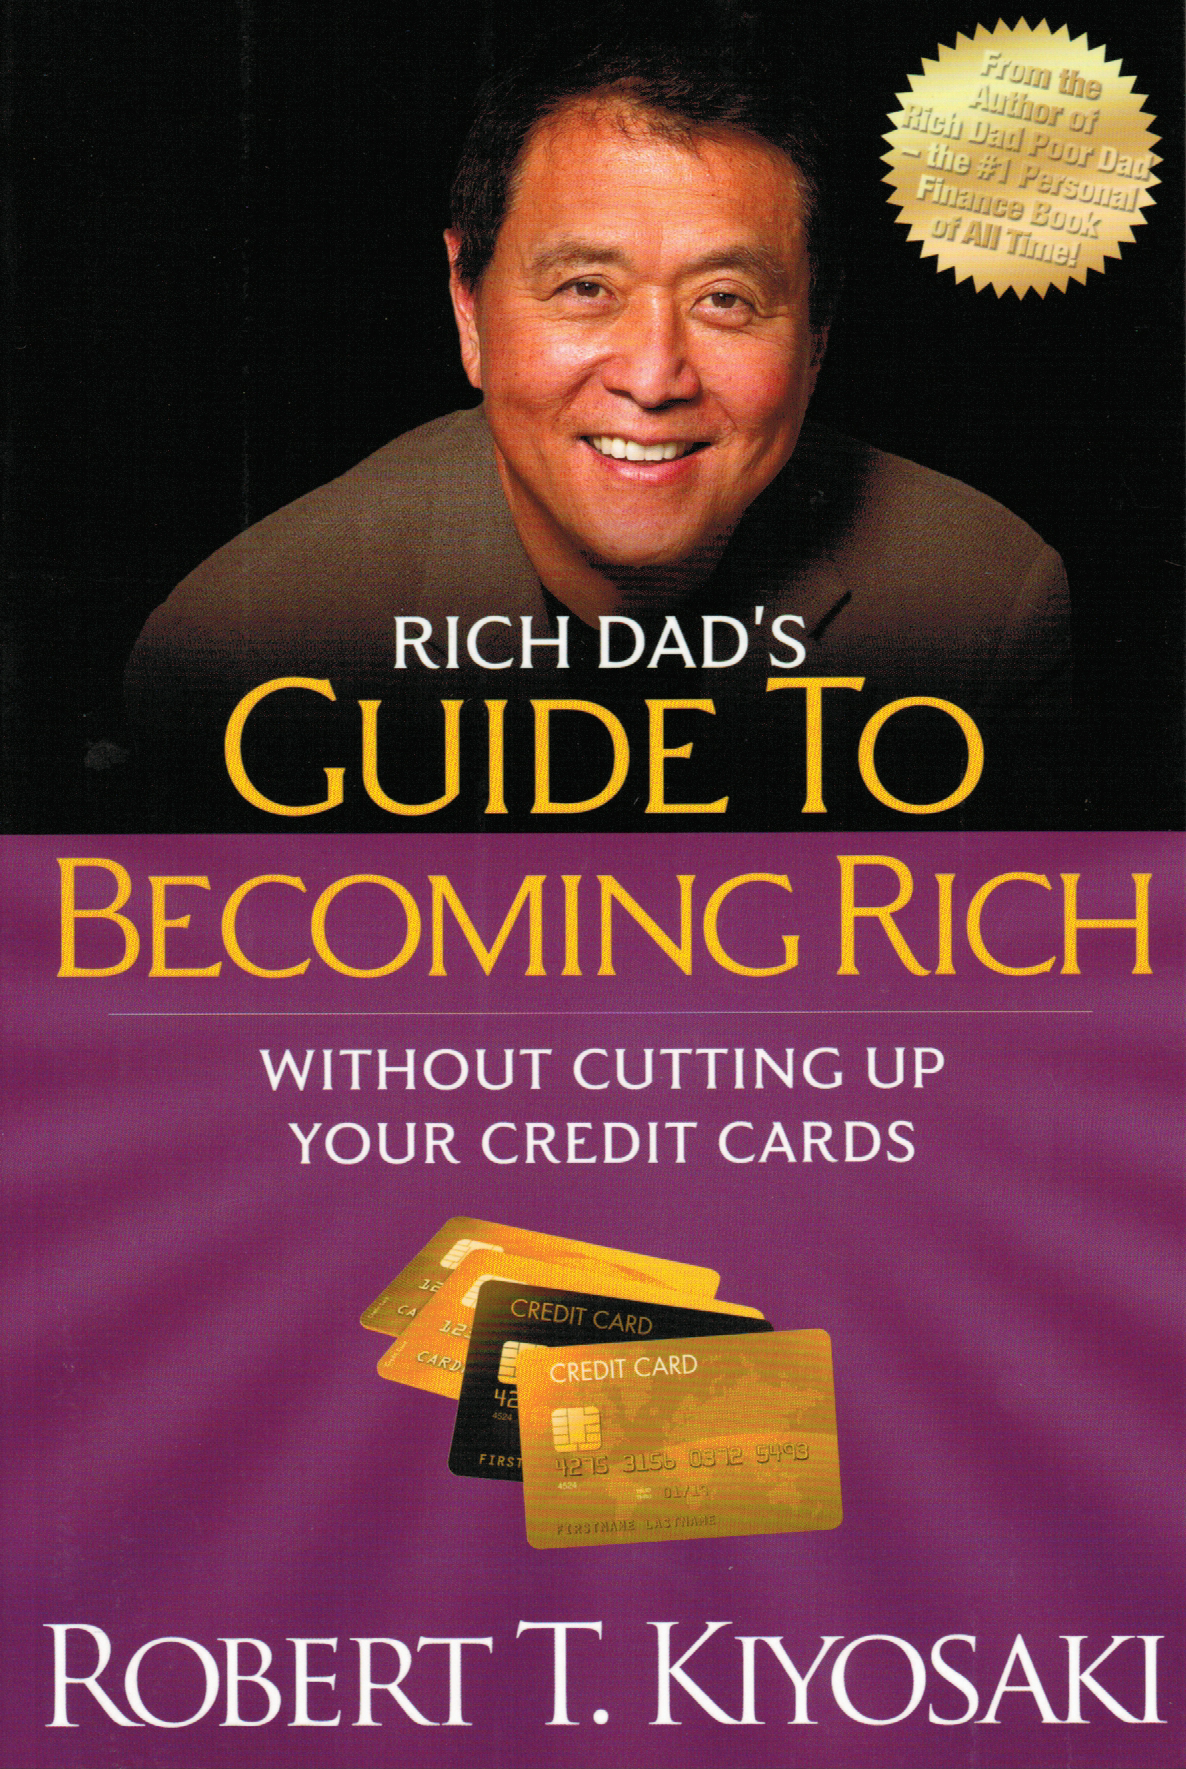 RICH DAD'S GUIDE TO BECOMING RICH WITHOUT CUTTING UP YOUR CREDIT CARDS